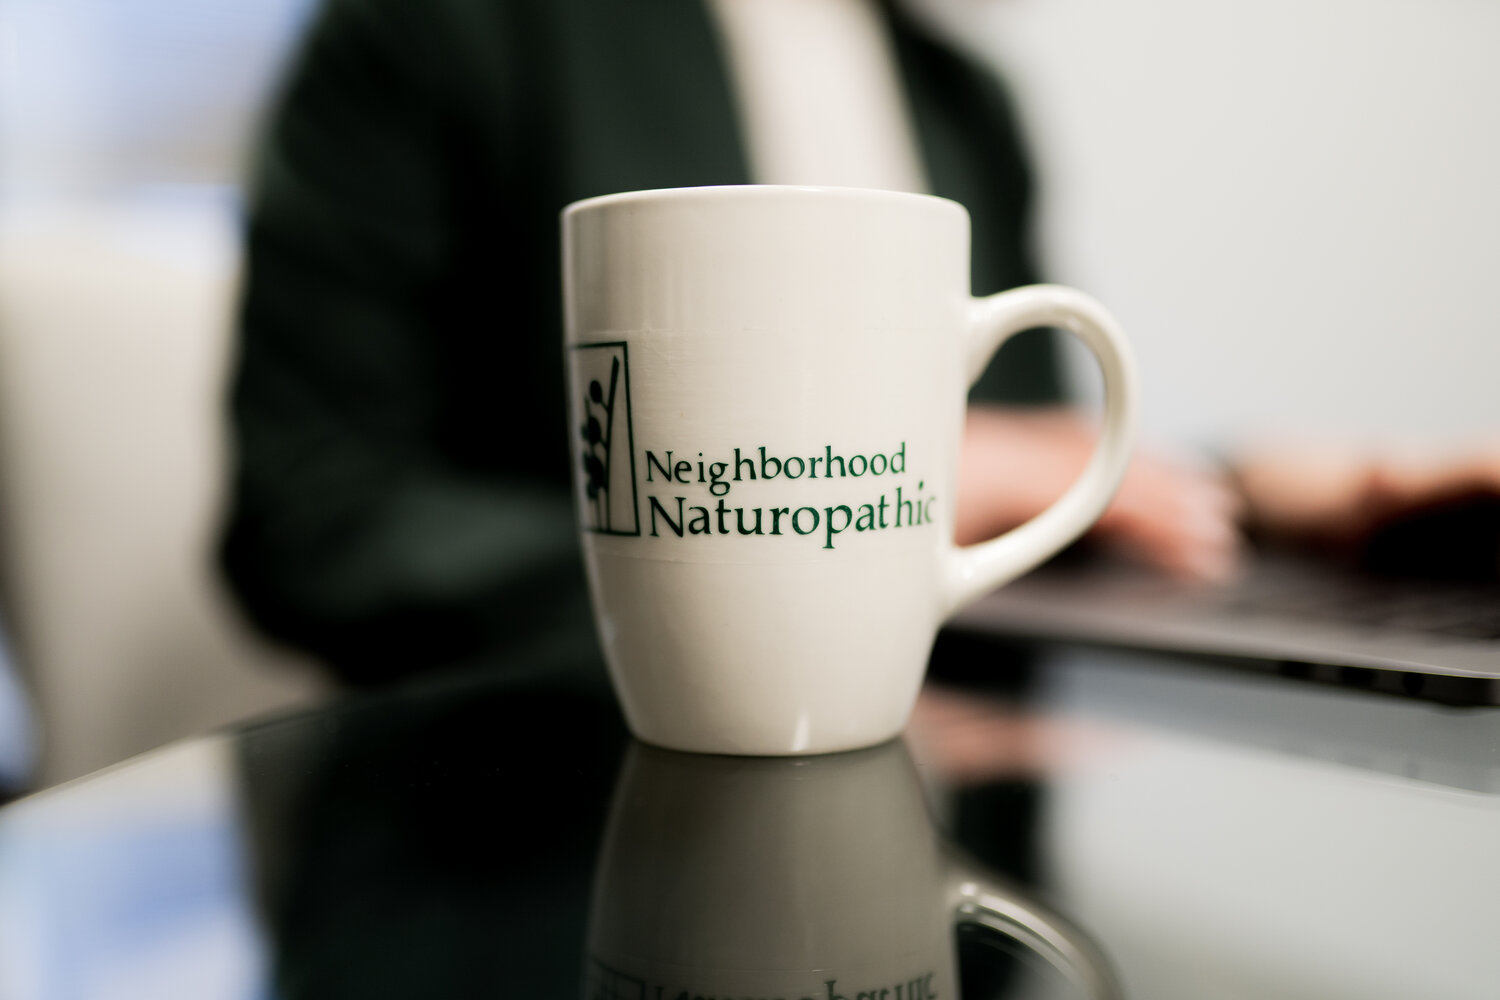 White mug placed on a table, the mug reads "Neighborhood Naturopathic" in forest green lettering